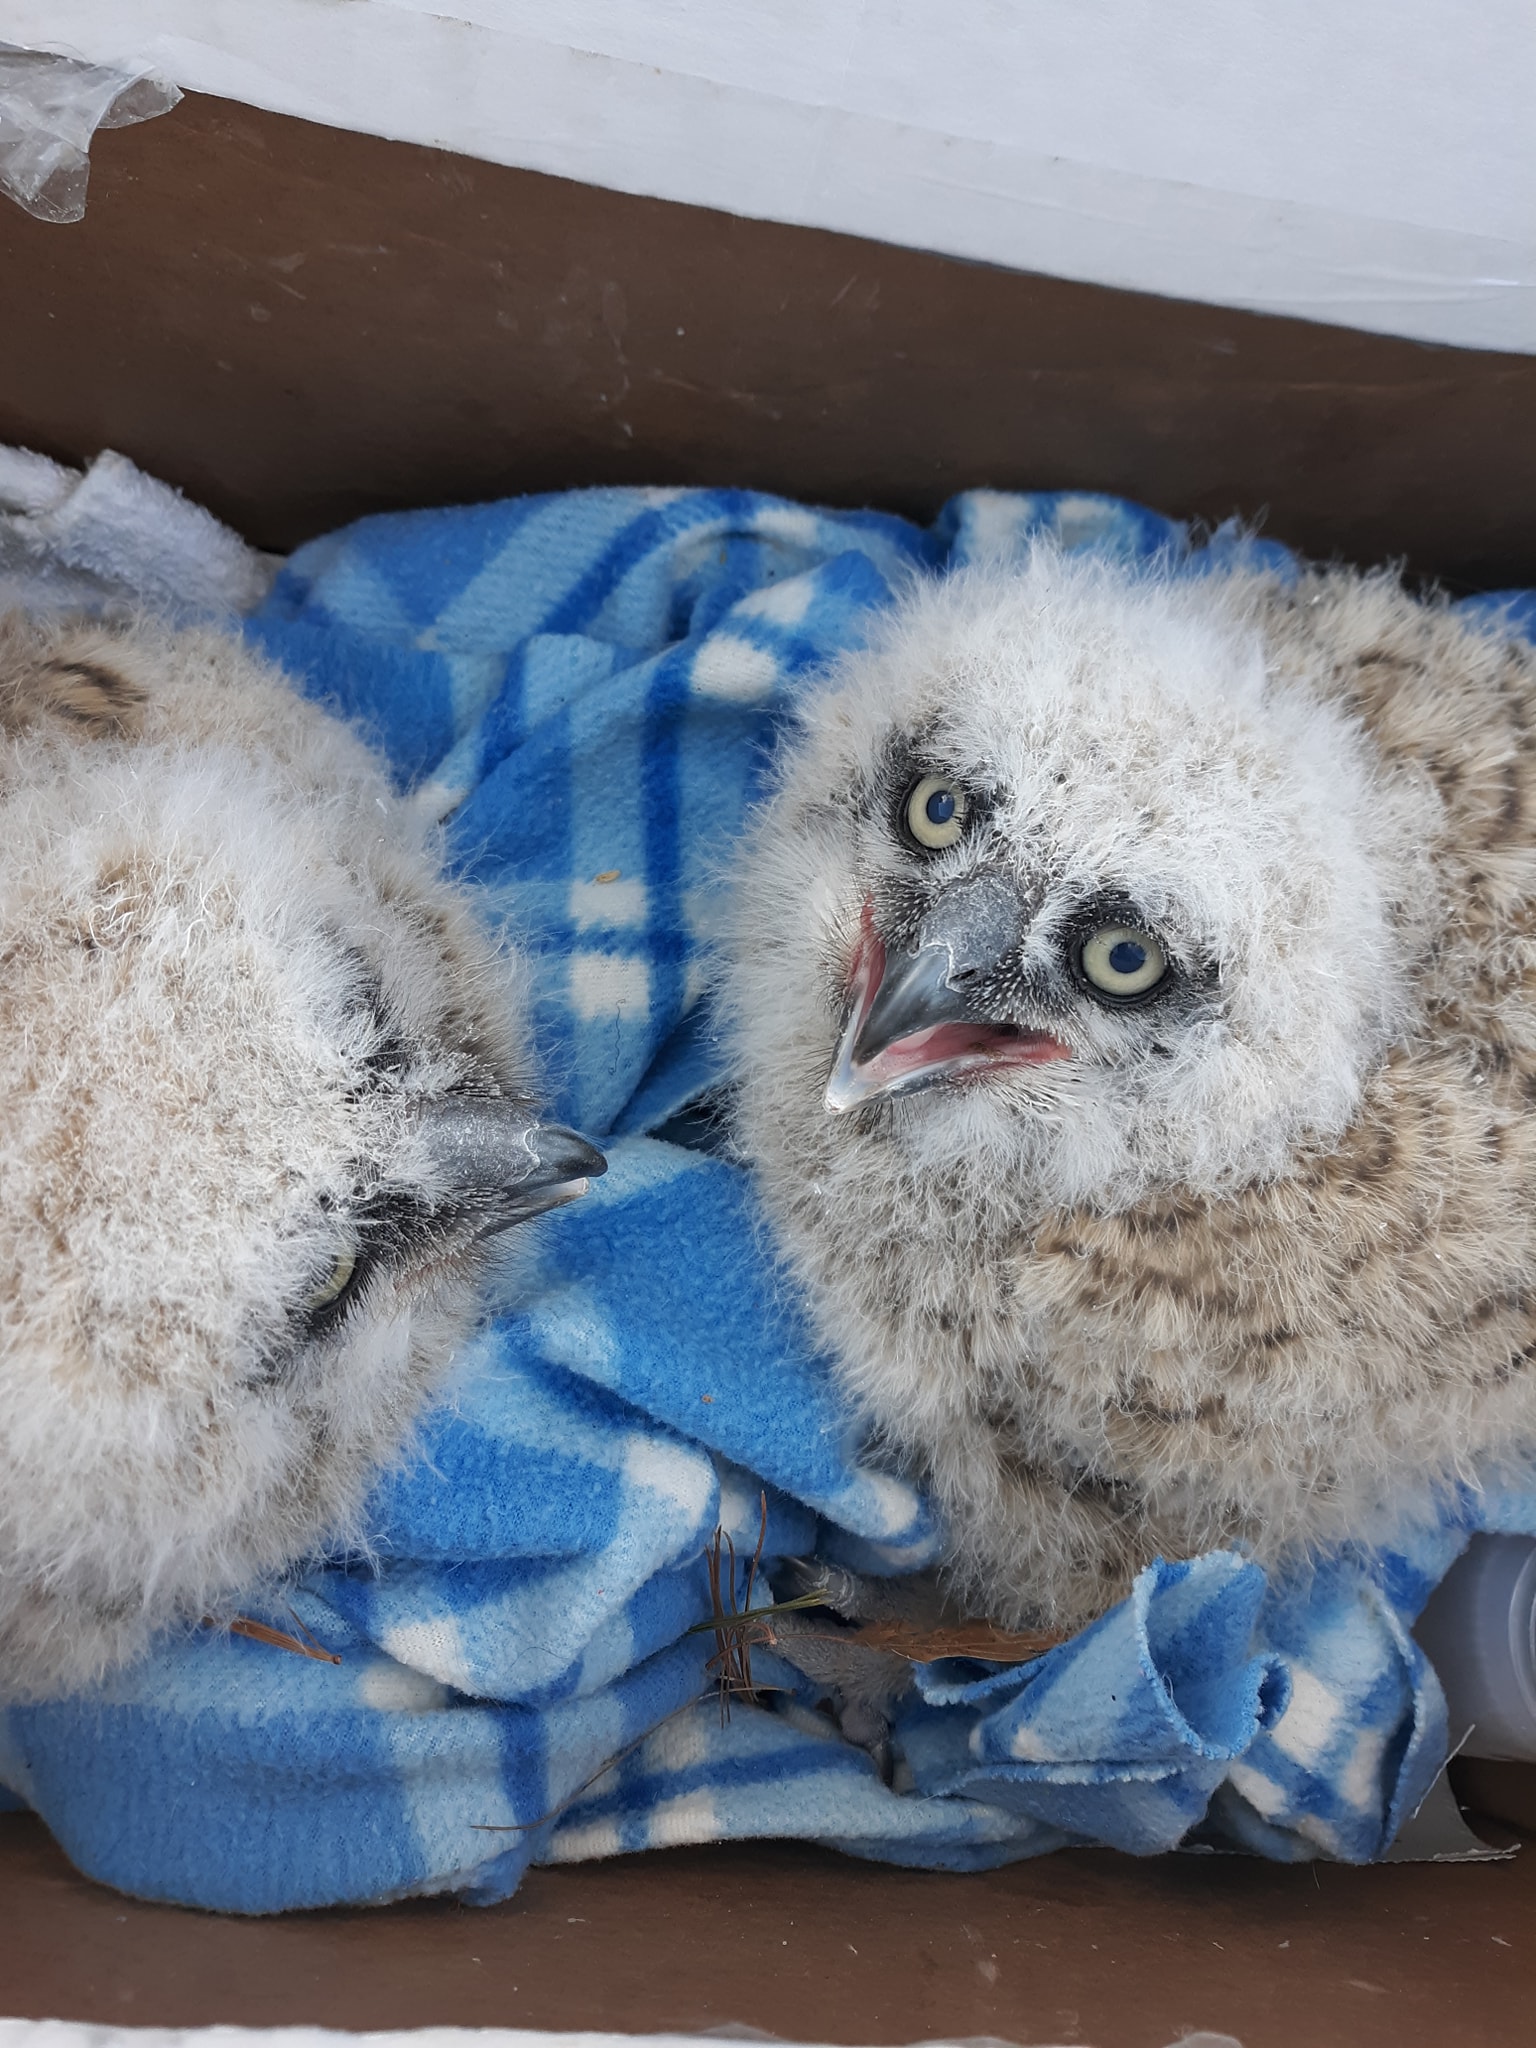 Two baby great horned owls